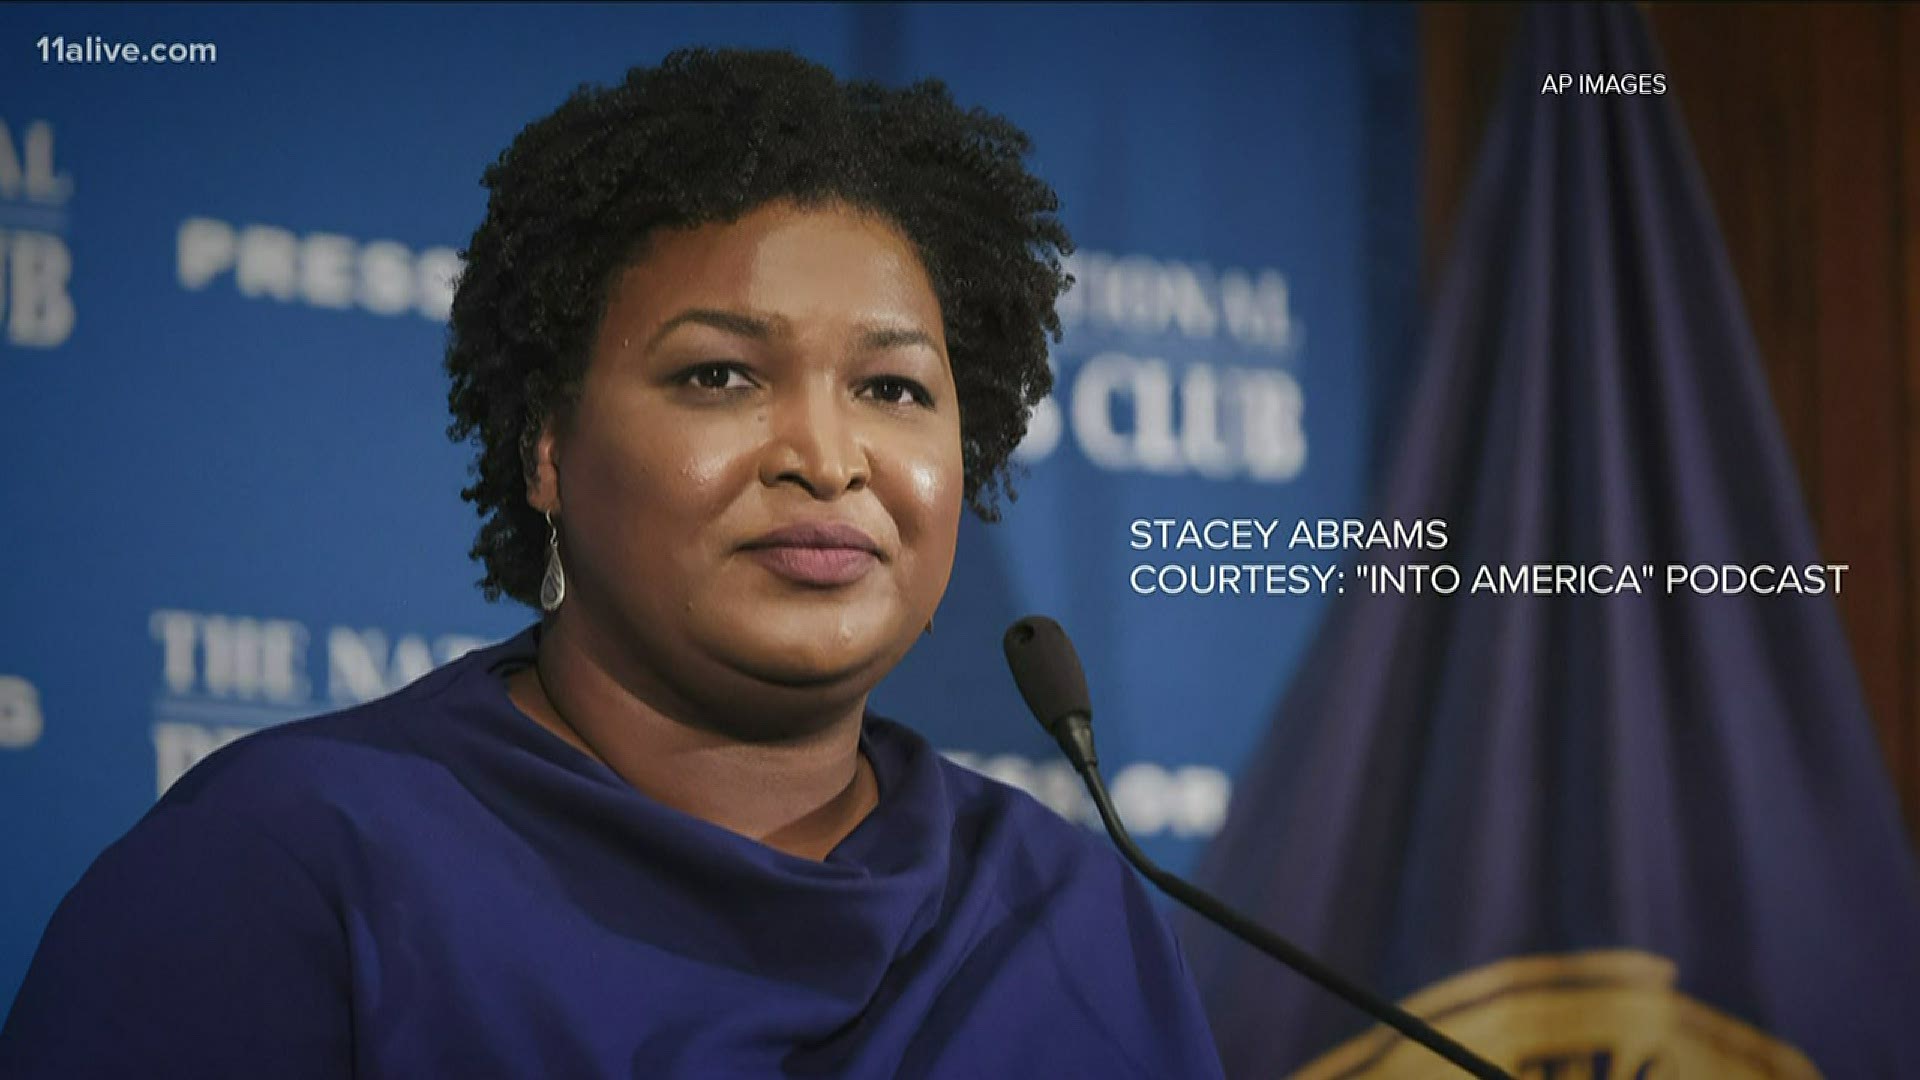 In the NBC News podcast "Into America", Abrams was asked about whether Biden needs to have a black woman on the ticket.